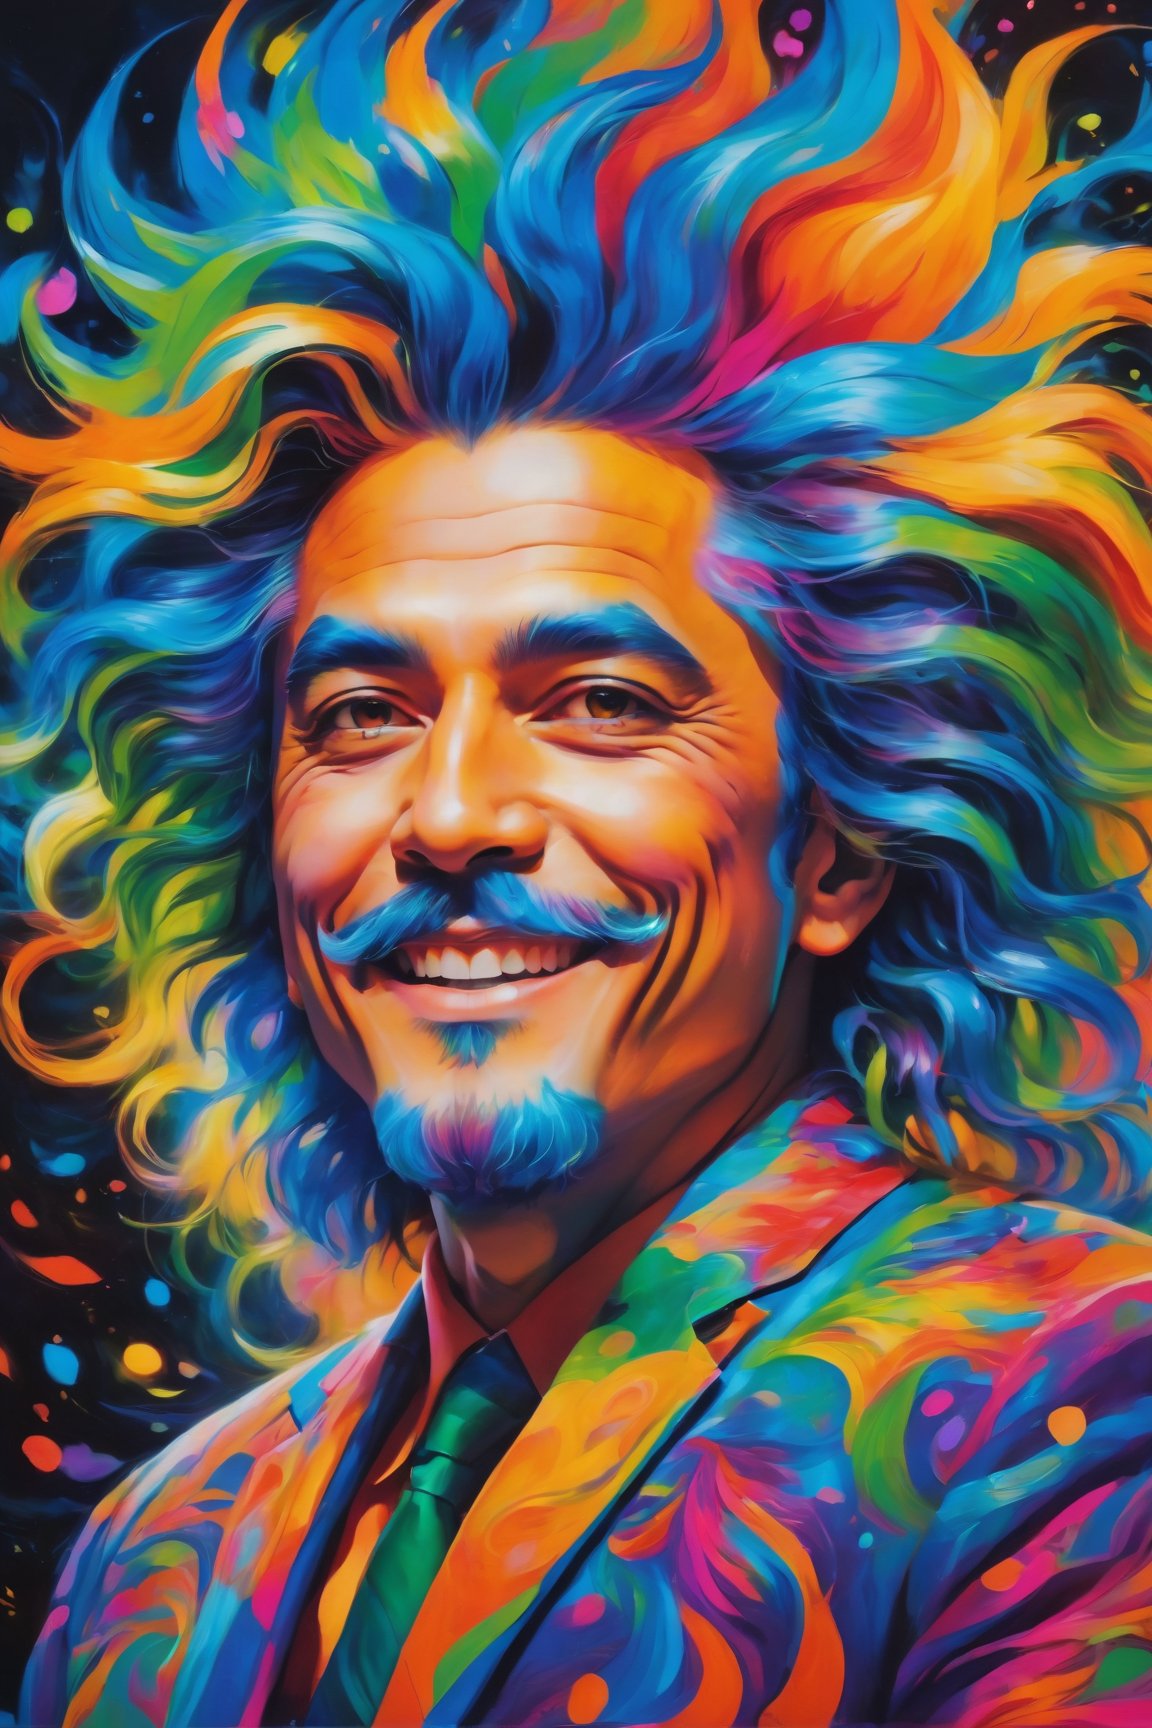 (best quality, 8K, highres, masterpiece), ultra-detailed, (super colorful, vibrant), in a mesmerizing and swirling composition, an ethereal madman with wild, multi-hued hair and an enigmatic, mischievous grin captivates viewers. The neon painting bursts with a kaleidoscope of vivid and contrasting shades that bring the character to life in a dazzling display of colors. Elongated limbs and vibrant, pointed facial features add an element of energetic expression and intrigue, while the artist's intricate and vibrant brushwork showcases a masterful skill and unwavering attention to detail. This high-quality image transports us into a world of awe-inspiring wonder, evoking a sense of curiosity and fascination